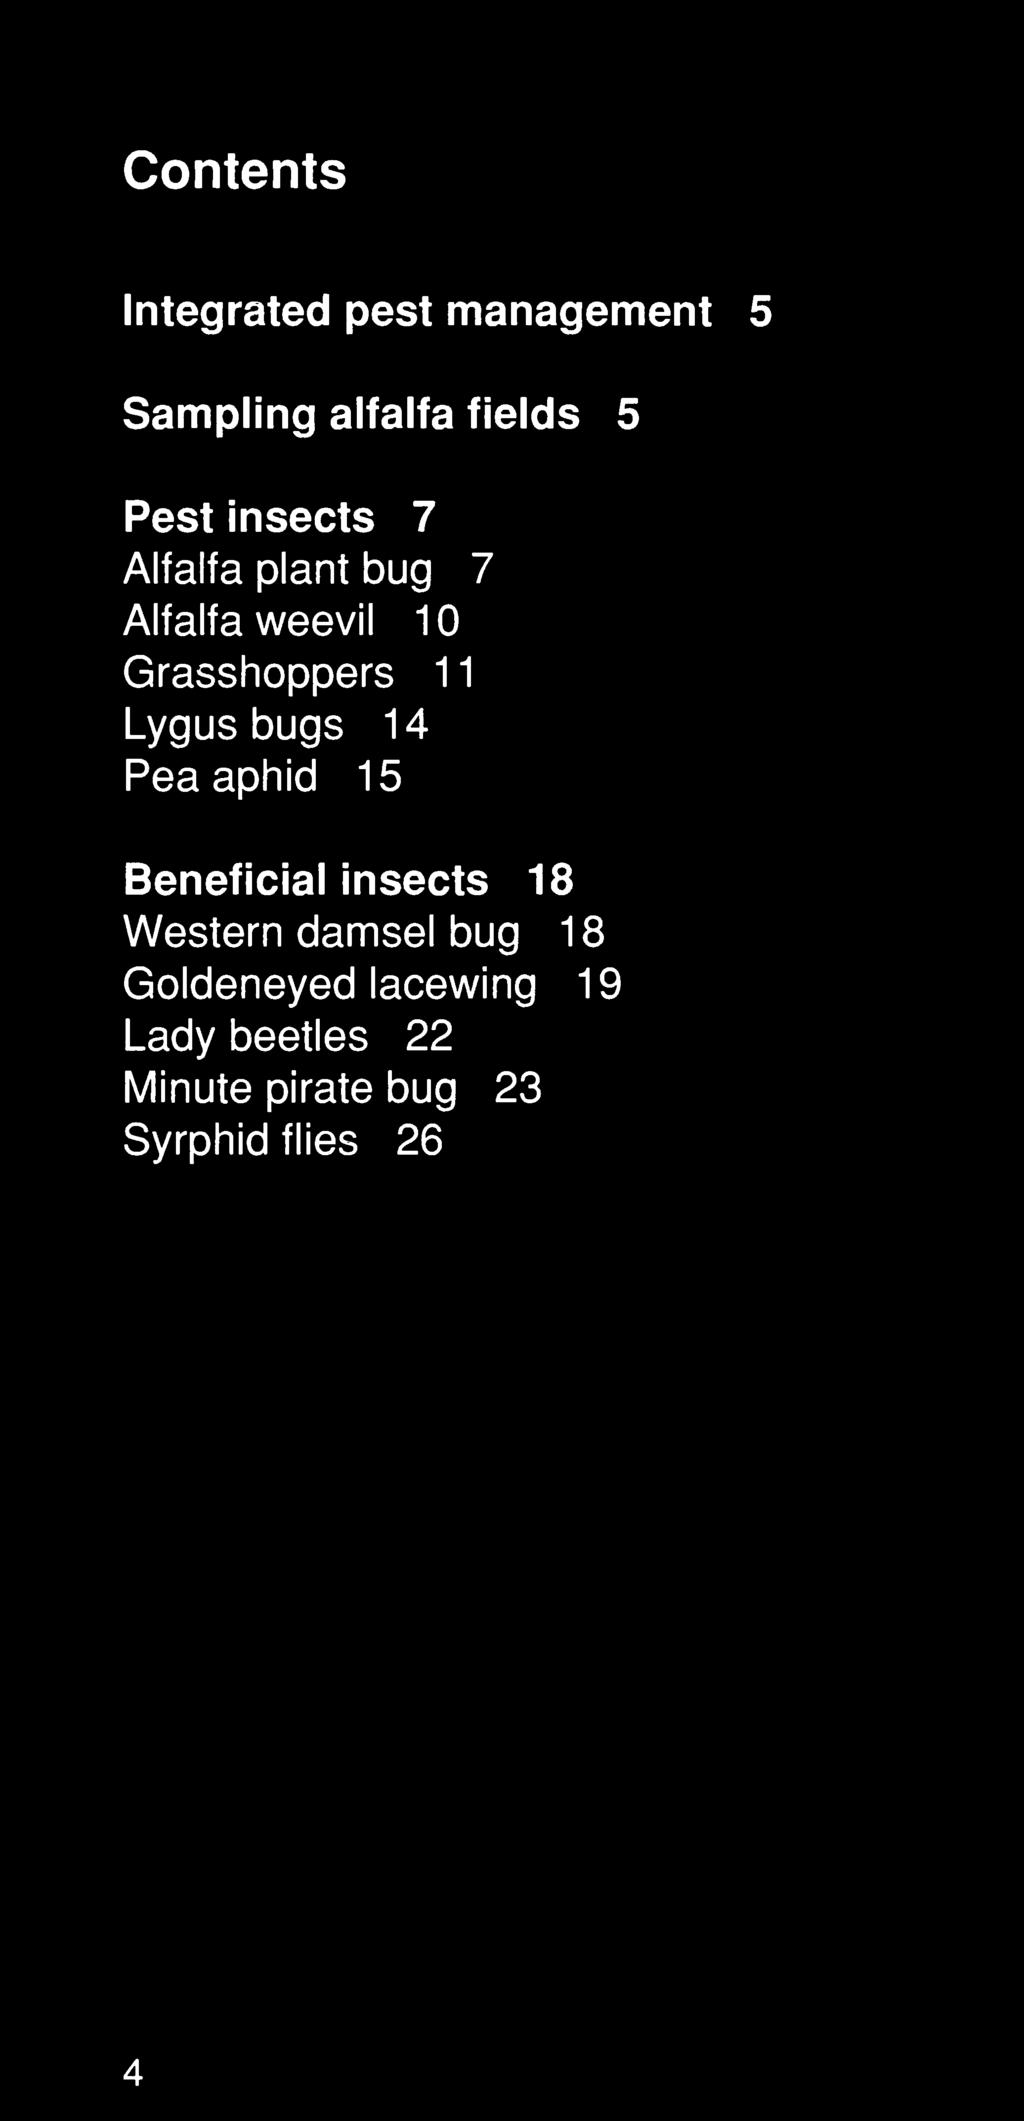 Contents Integrated pest management 5 Sampling alfalfa fields 5 Pest insects 7 Alfalfa plant bug 7 Alfalfa weevil 10 Grasshoppers 1